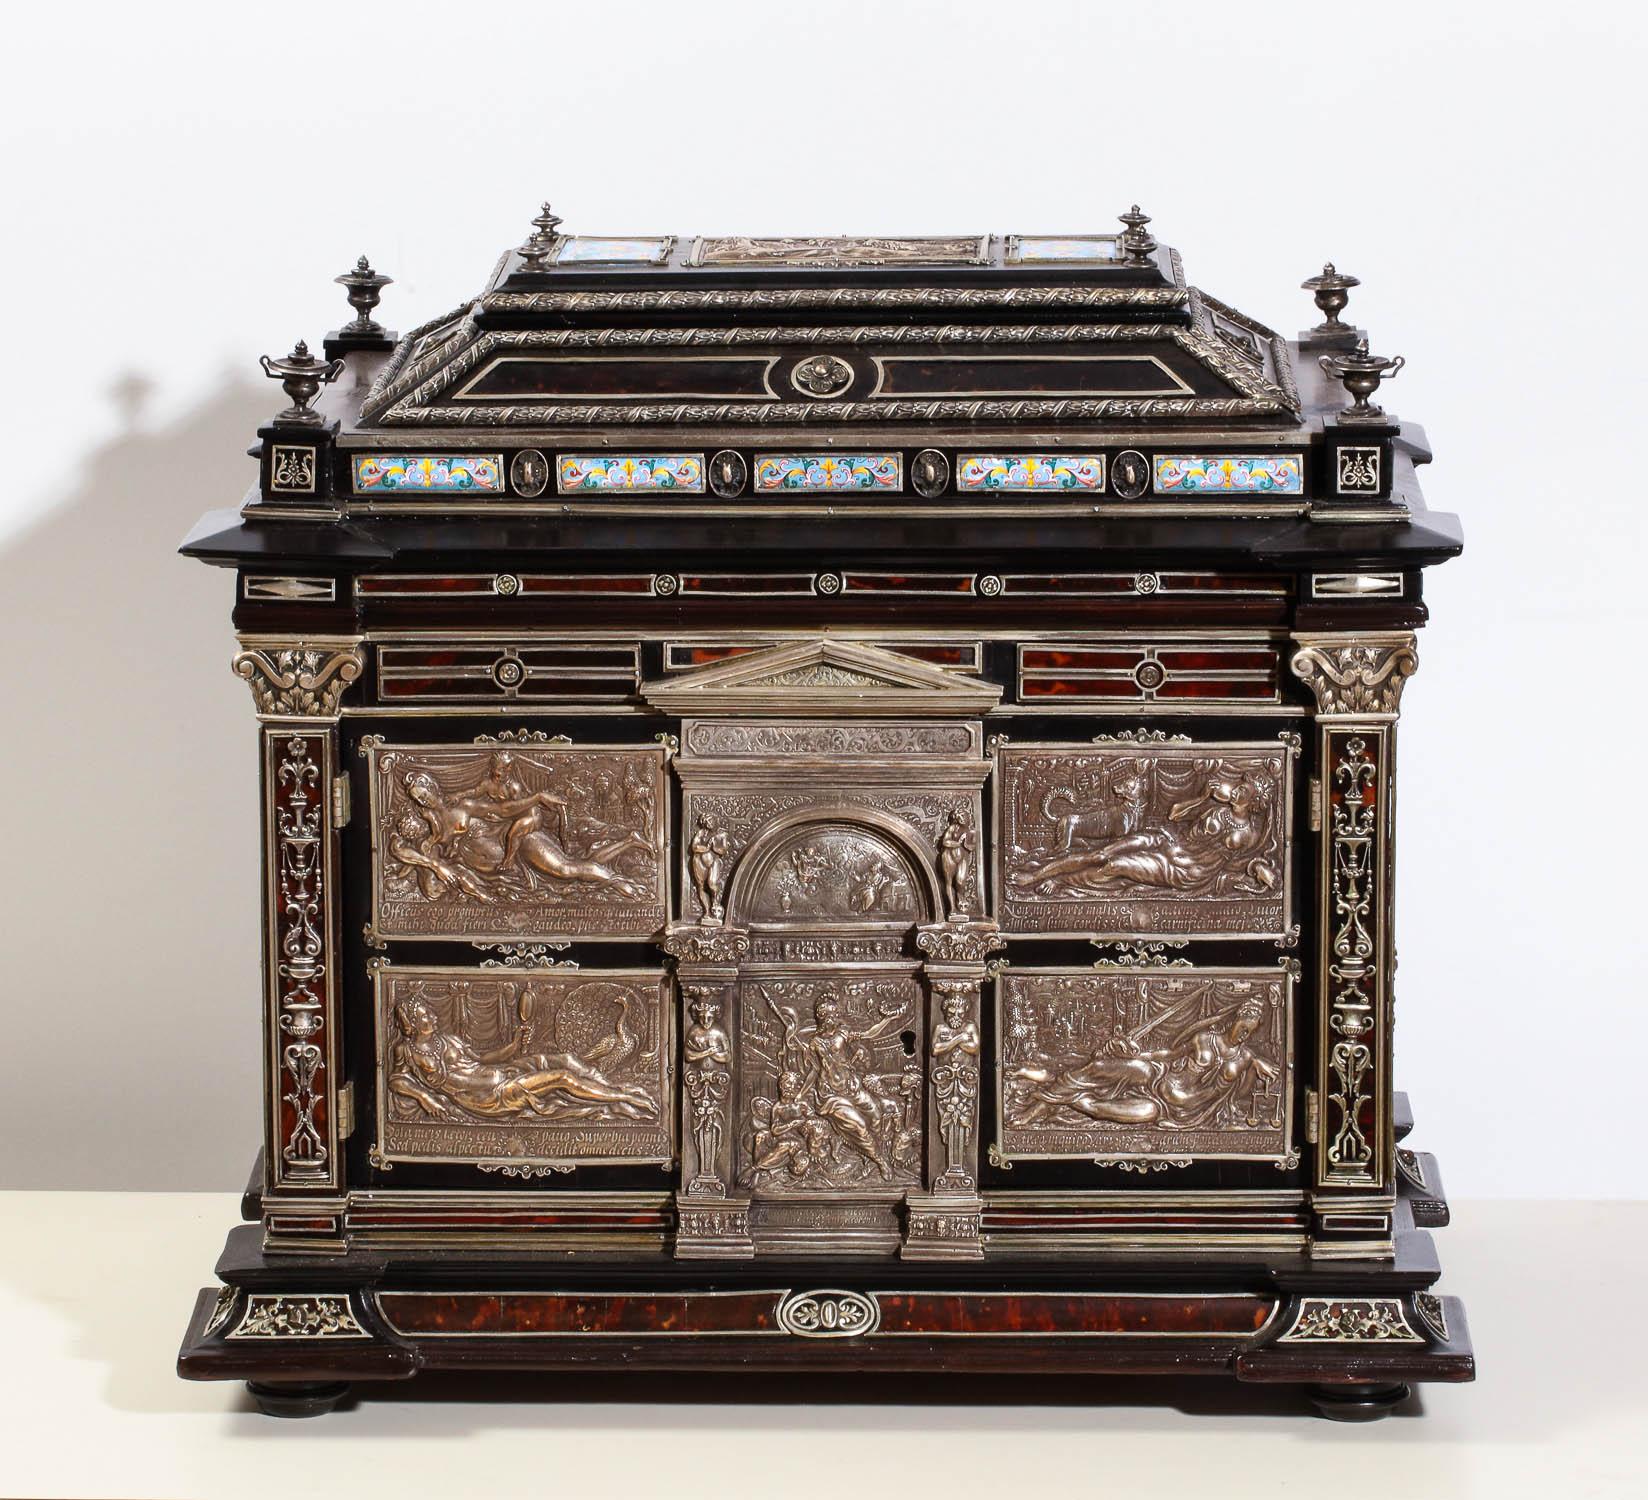 Important Silver & Viennese enamel mounted repousse tortoiseshell jewelry cabinet box in the Renaissance style.

Very large and impressive in size.

This extraordinary, large antique table cabinet in the Greco-Roman / Renaissance style dates